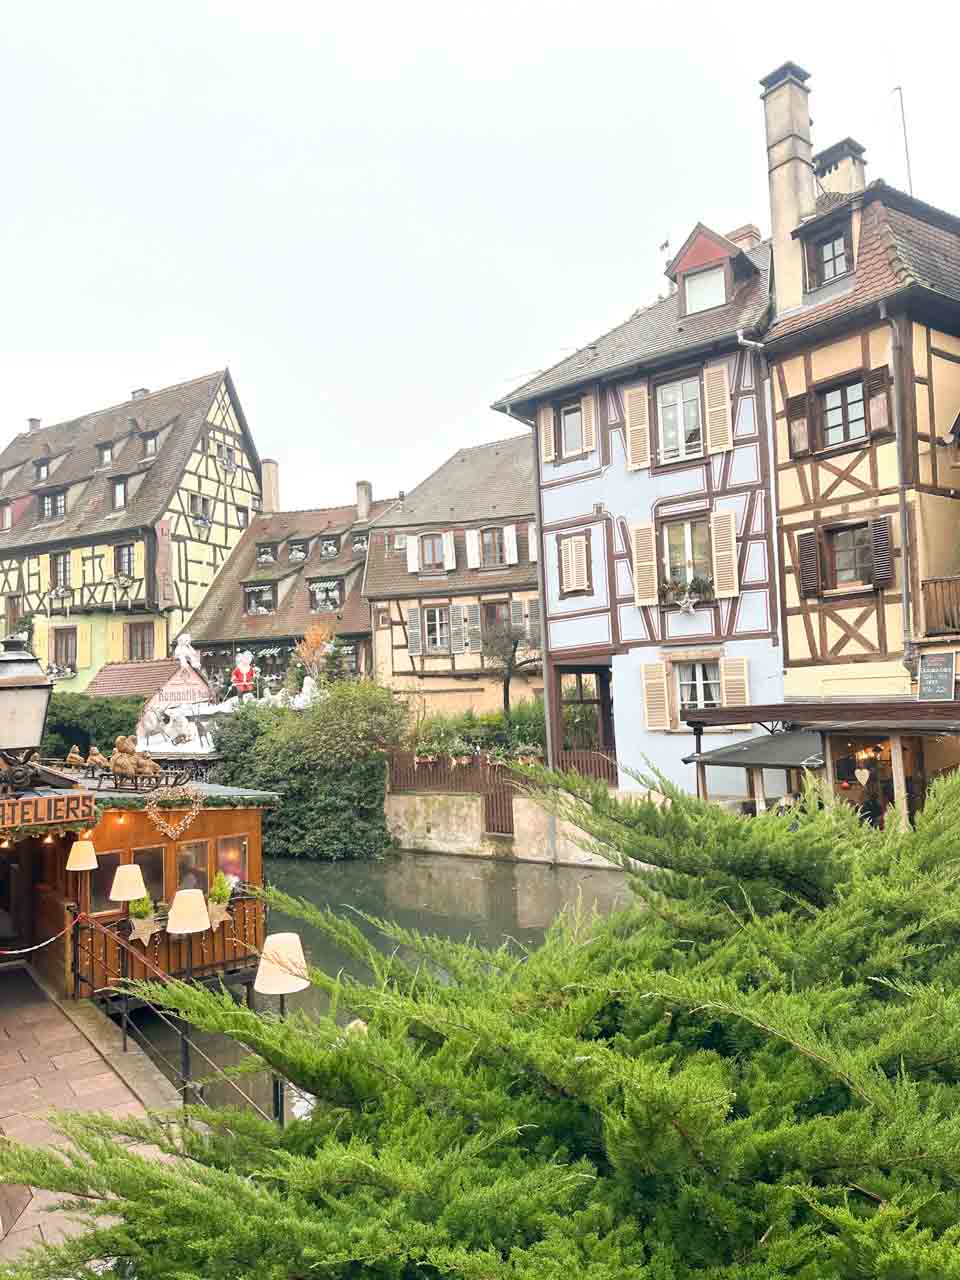 A view of the Colmar canal with traditional Alsatian houses